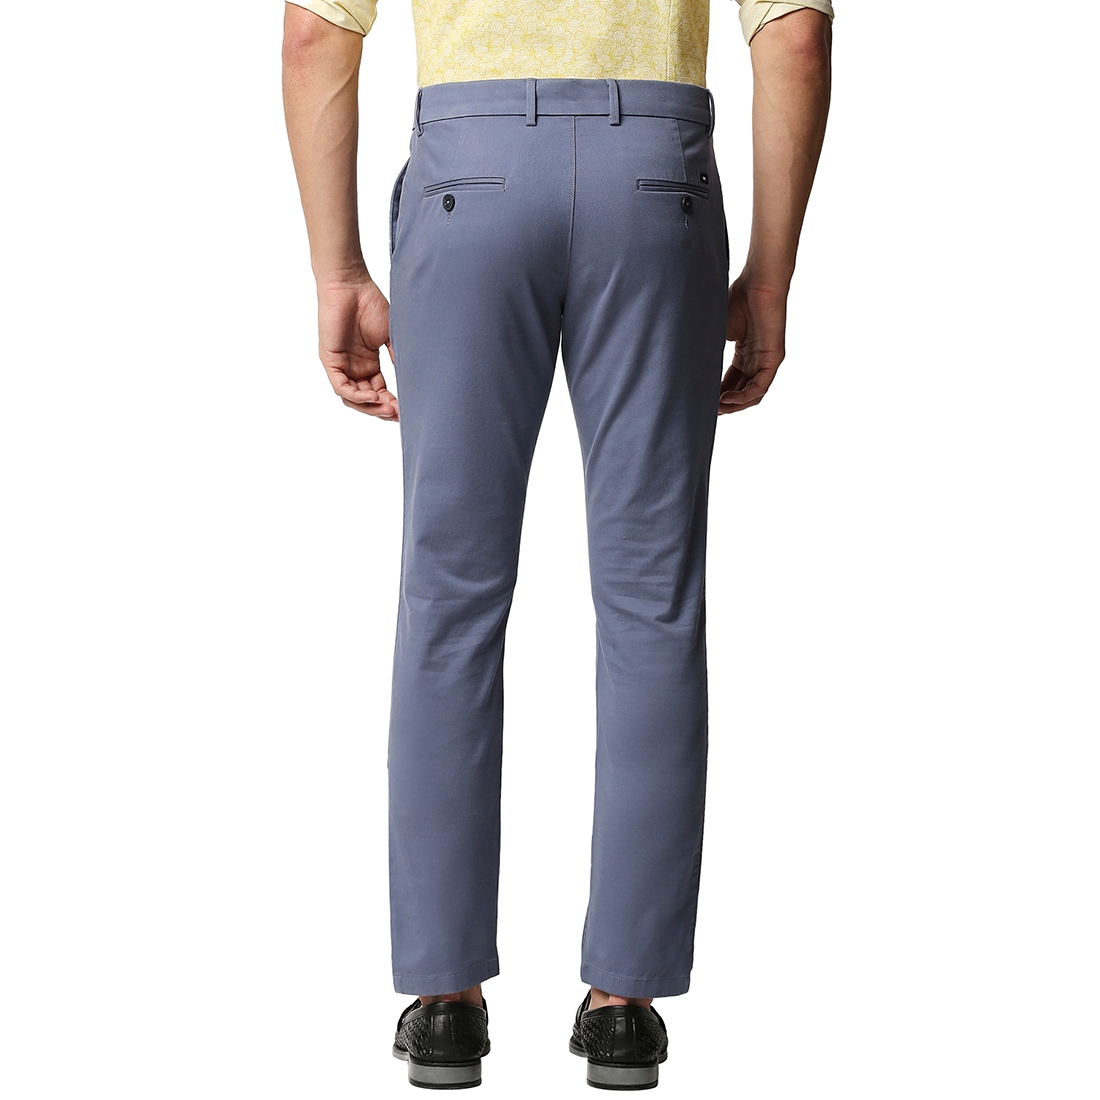 BASICS CASUAL PLAIN BLUE COTTON STRETCH TAPERED TROUSERS 